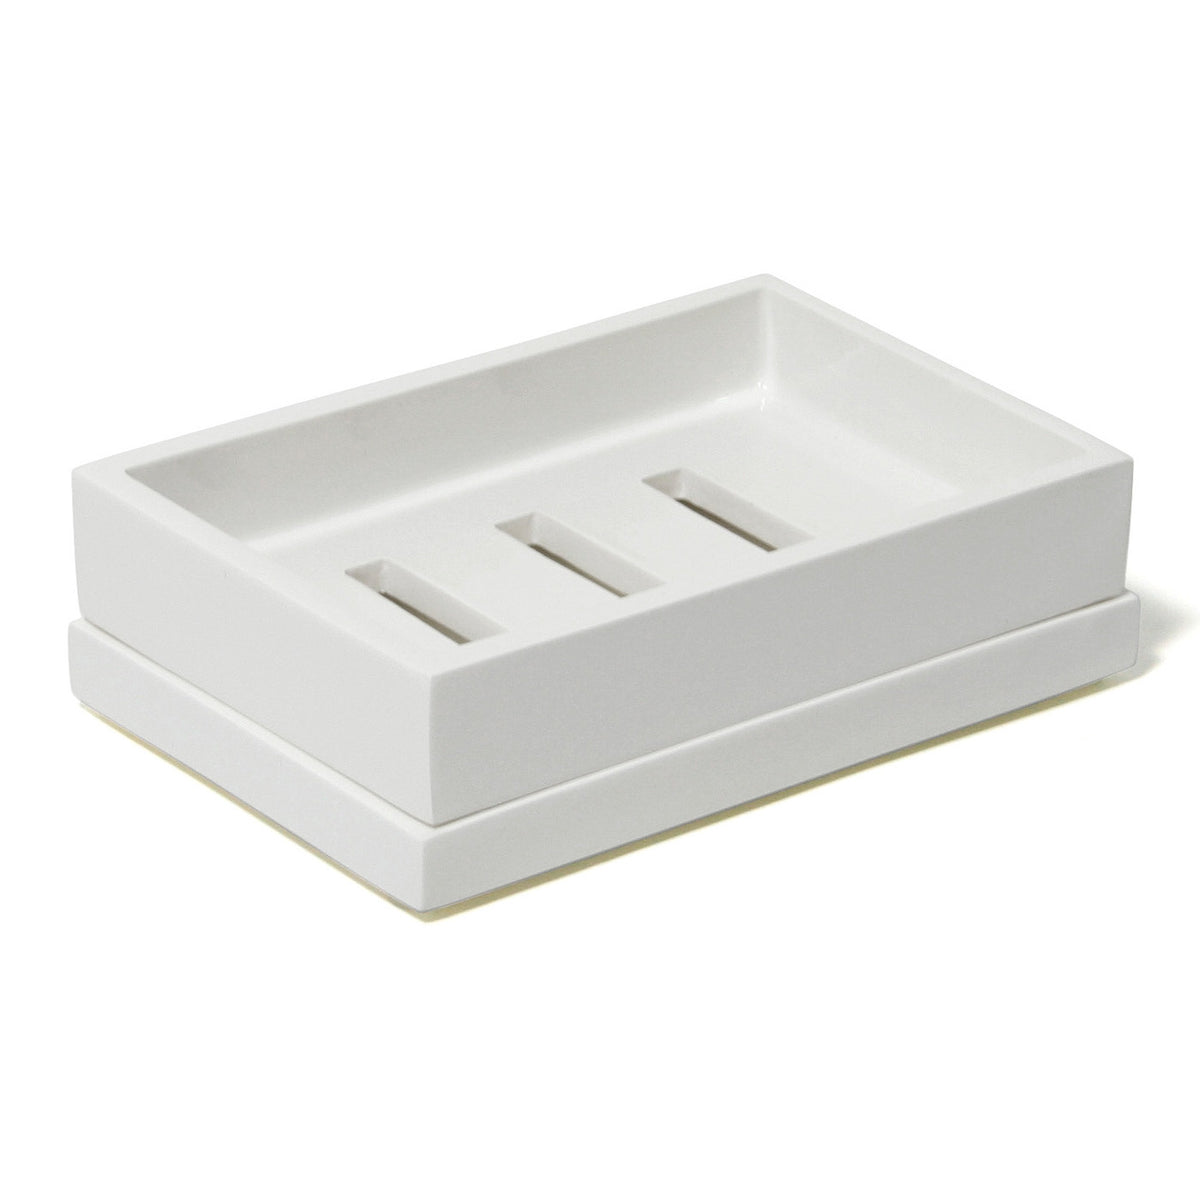 Lacquer Soap Dish by Jonathan Adler